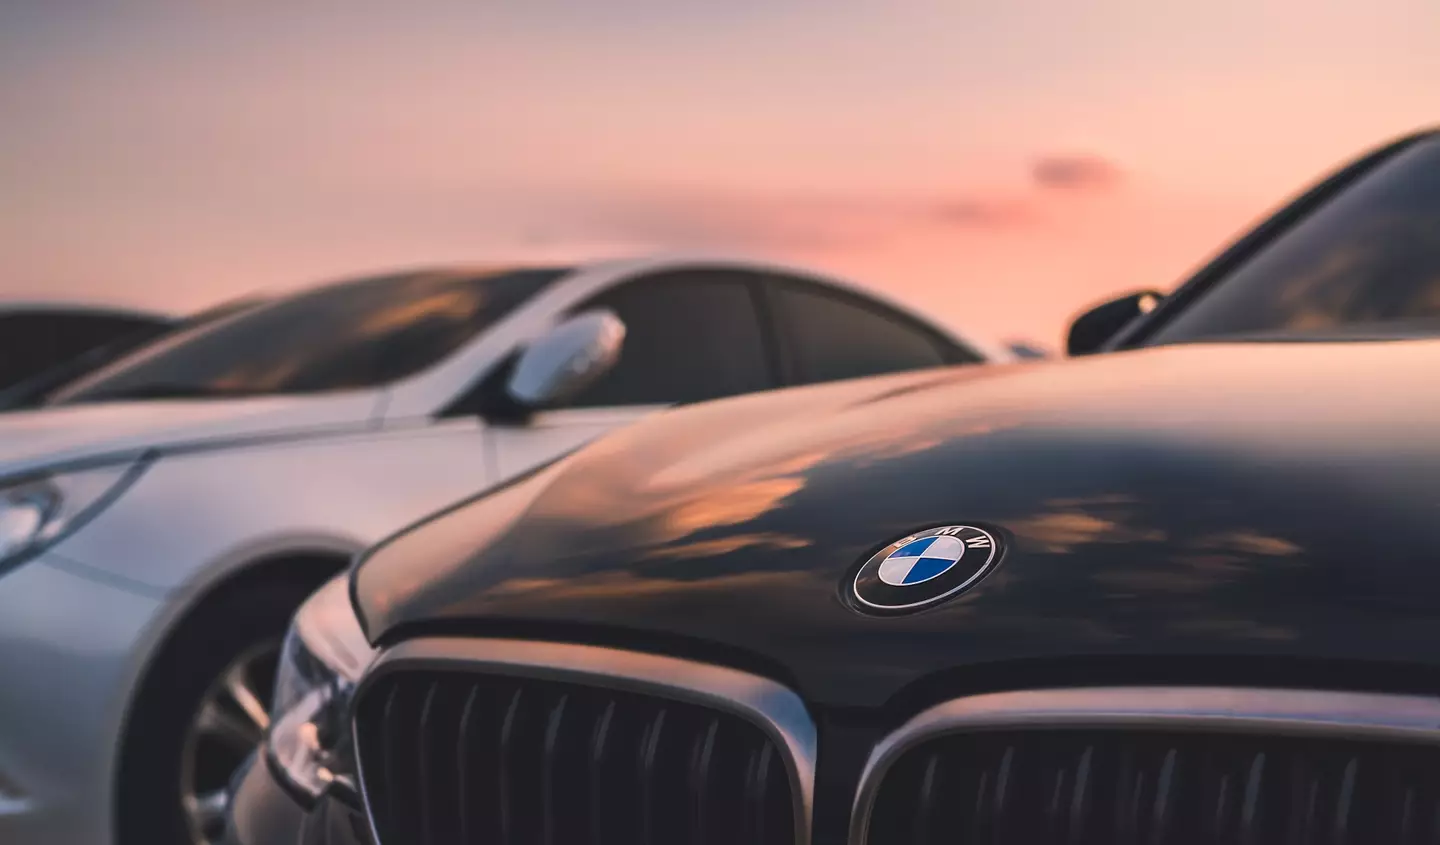 BMW is now charging customers as much as $18 (£15) per month for heated seats.